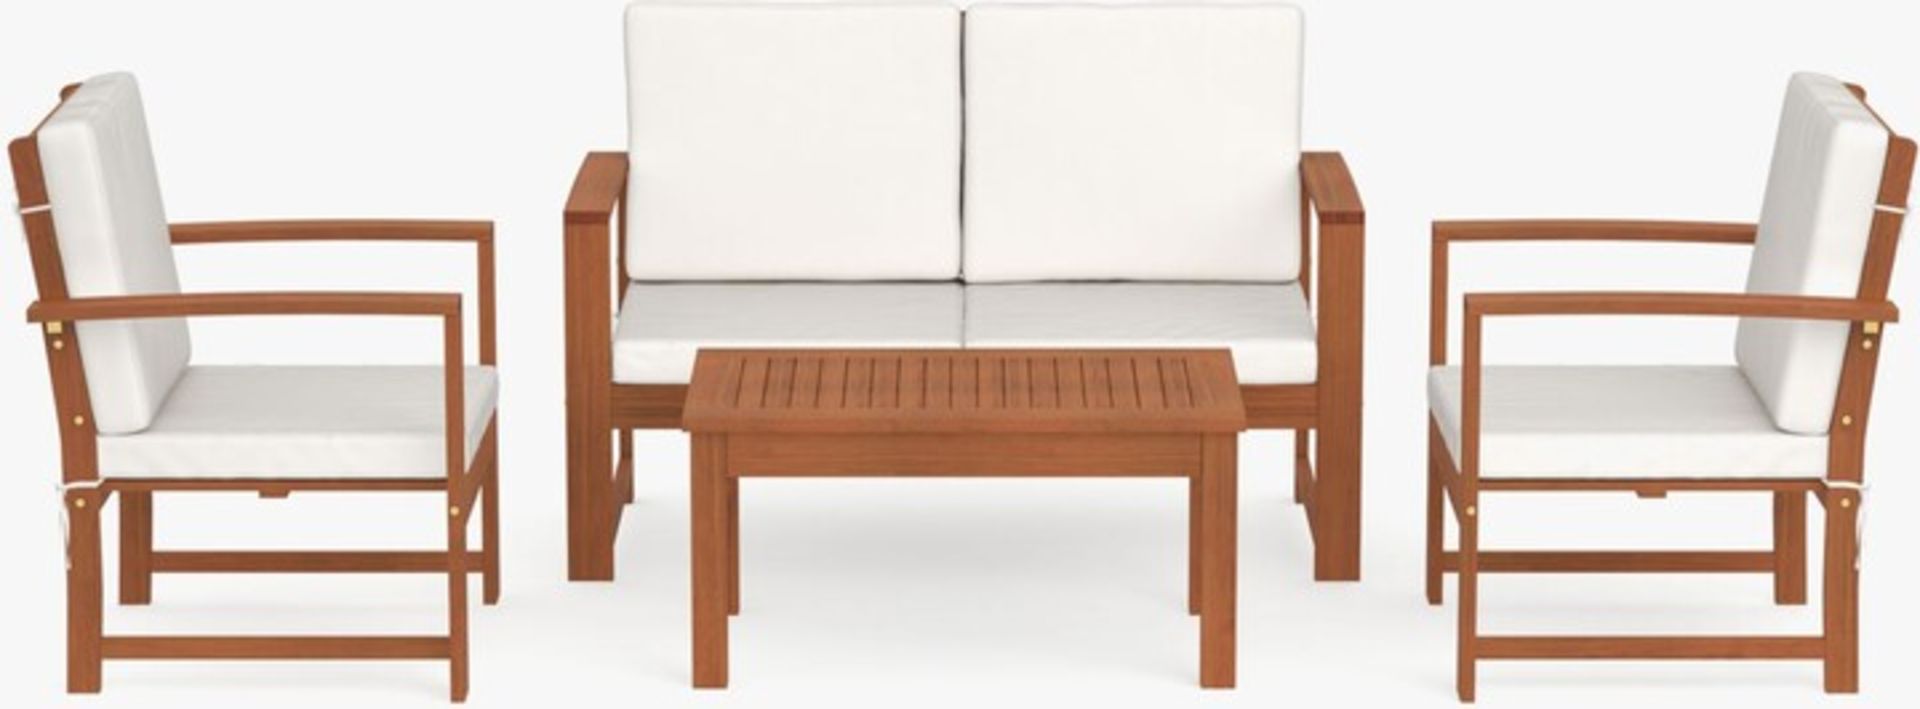 BRAND NEW JOHN LEWIS 4-Seater Garden Lounging Table & Chairs Set. RRP £898.50. Upgrade your garden - Image 3 of 3